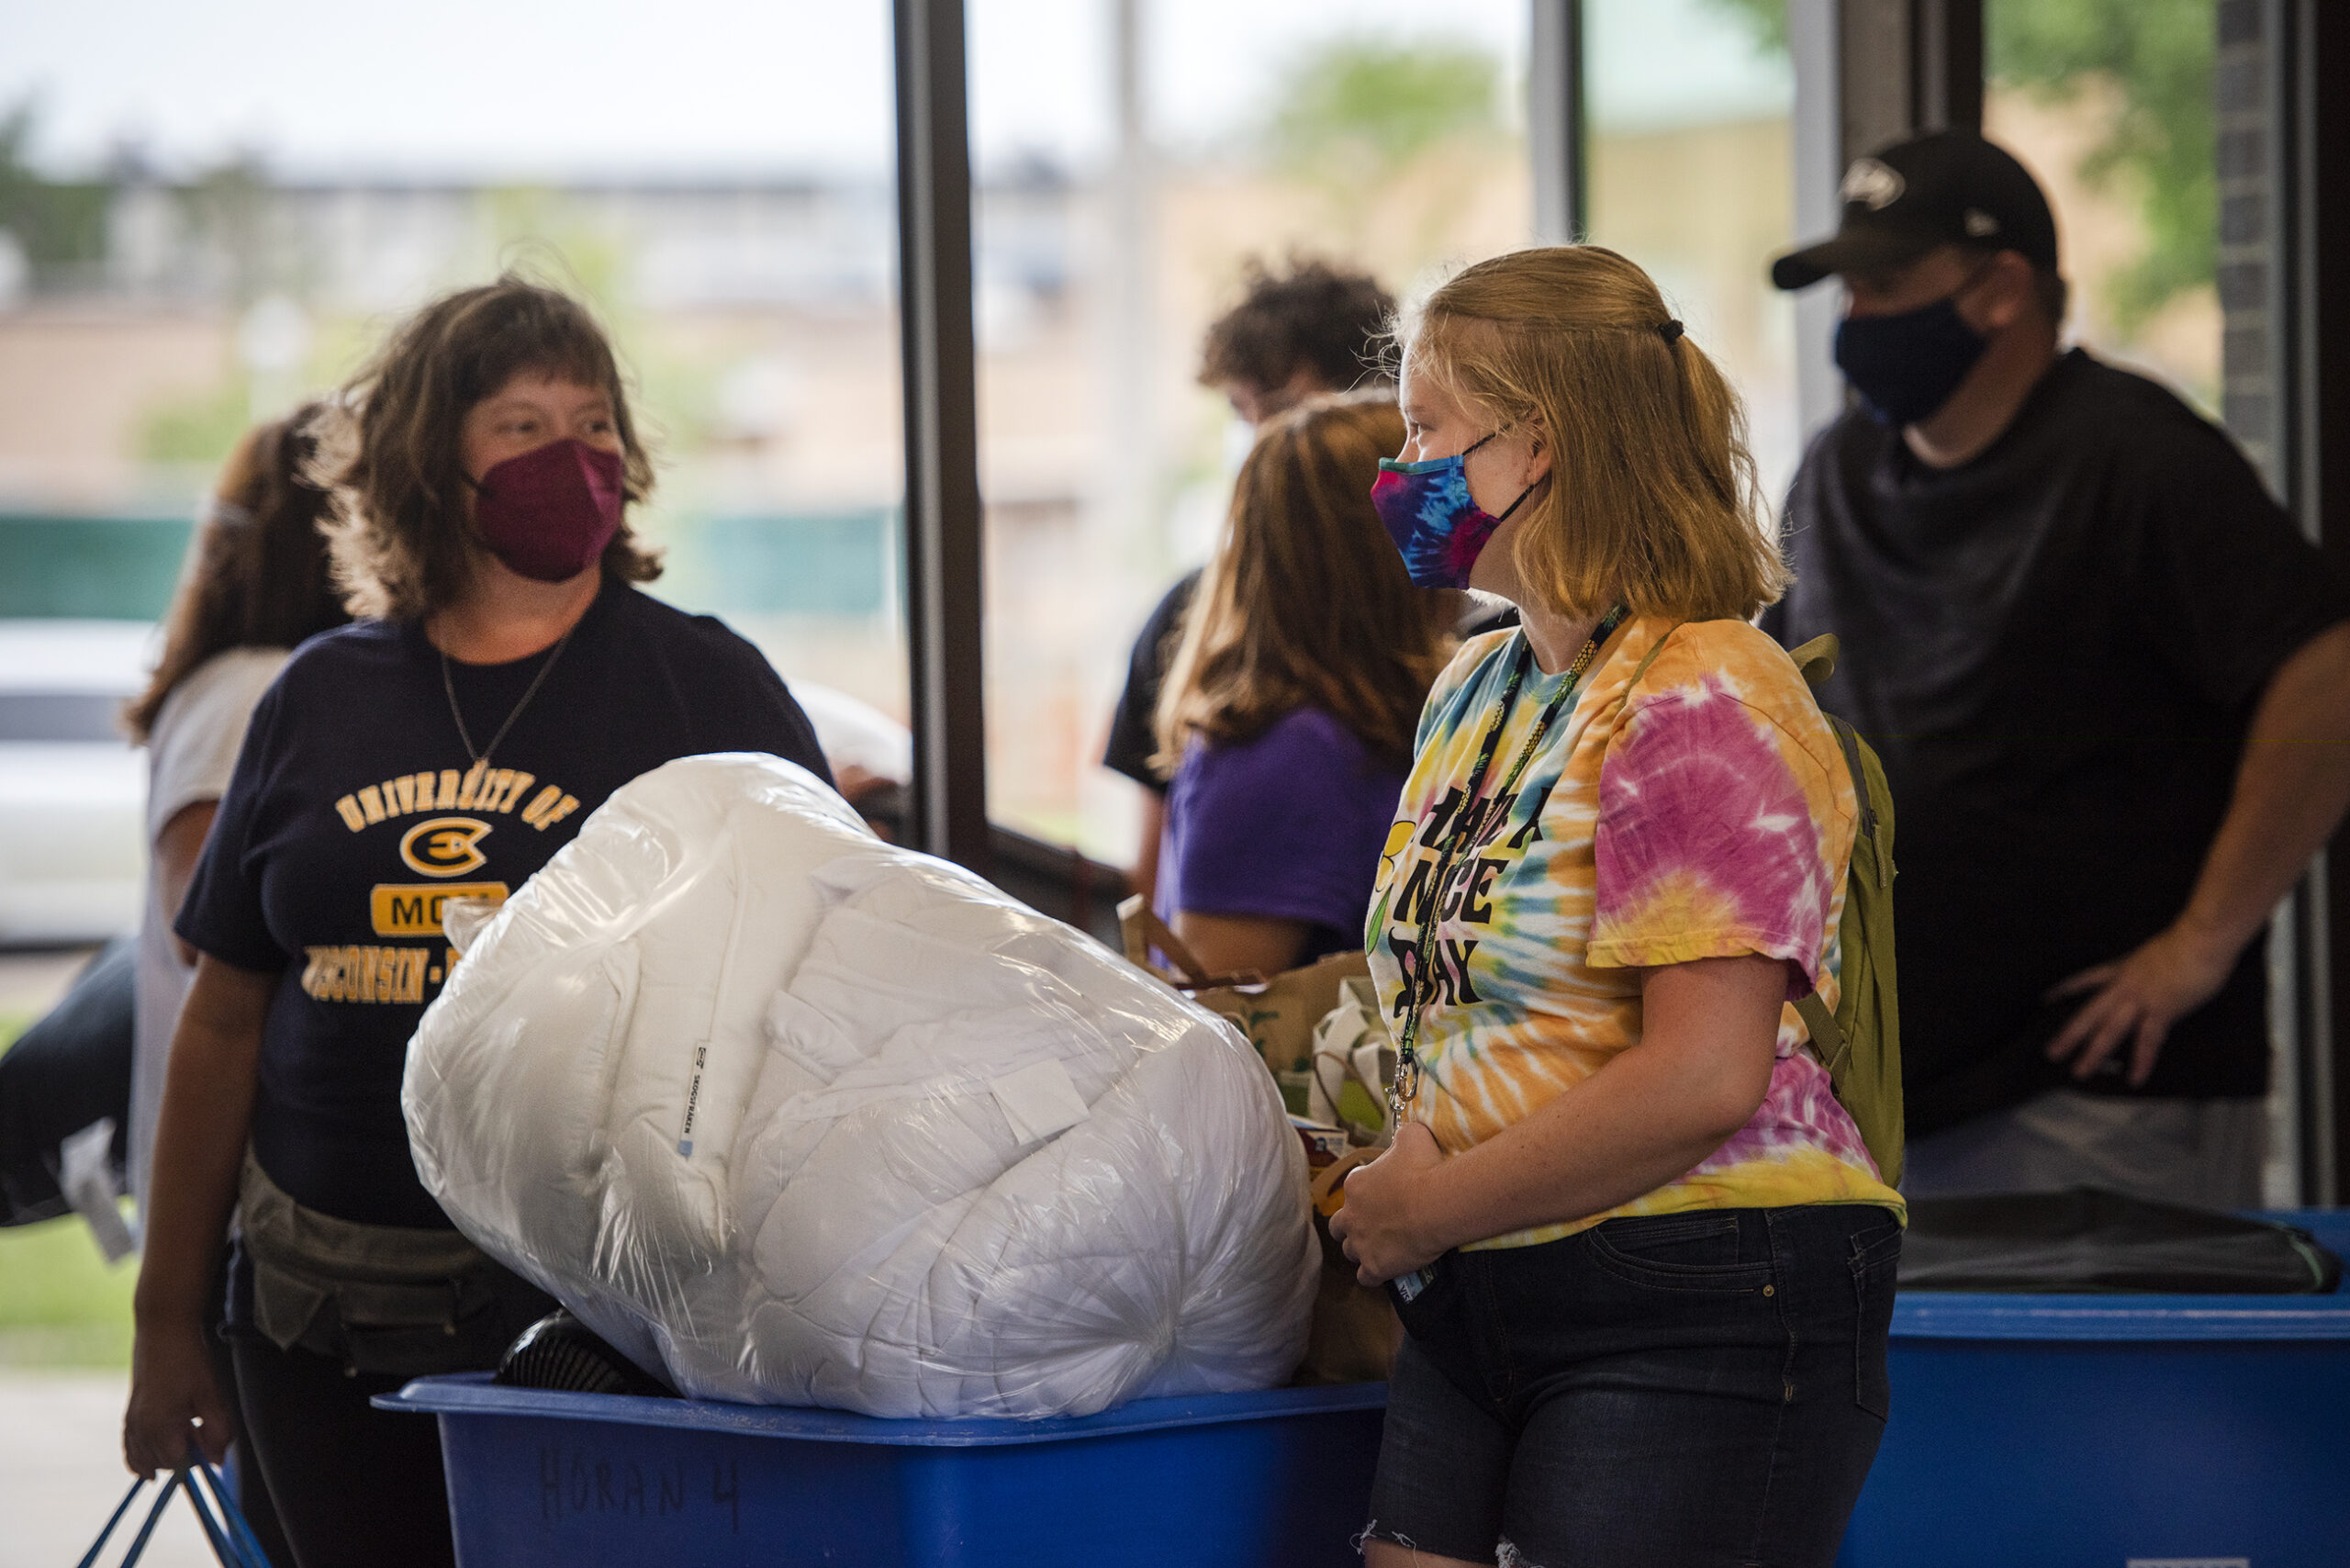 People stand in a lobby near bins full of bedding and other items.